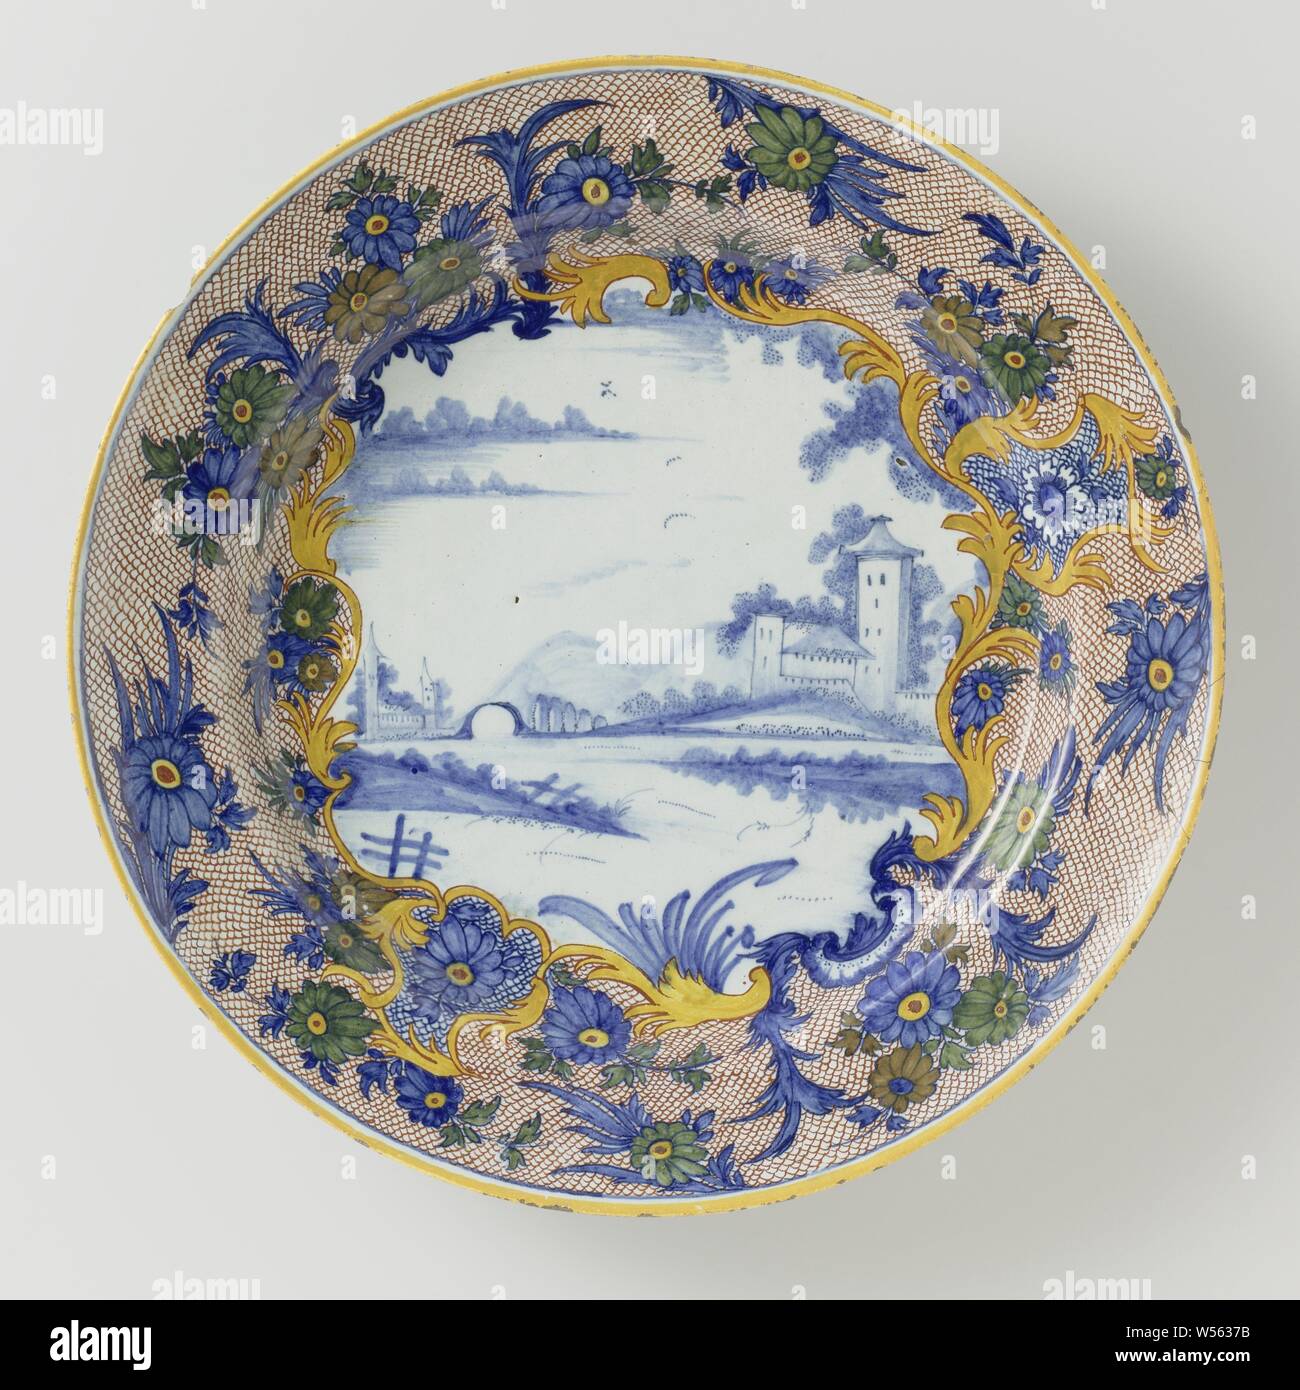 Dish of multicolored painted faience, Dish of faience. On the shelf a landscape in blue. Around it a multicolored flower border., anonymous, Delft, c. 1750 - c. 1780, d 34.8 cm × h 5.7 cm Stock Photo